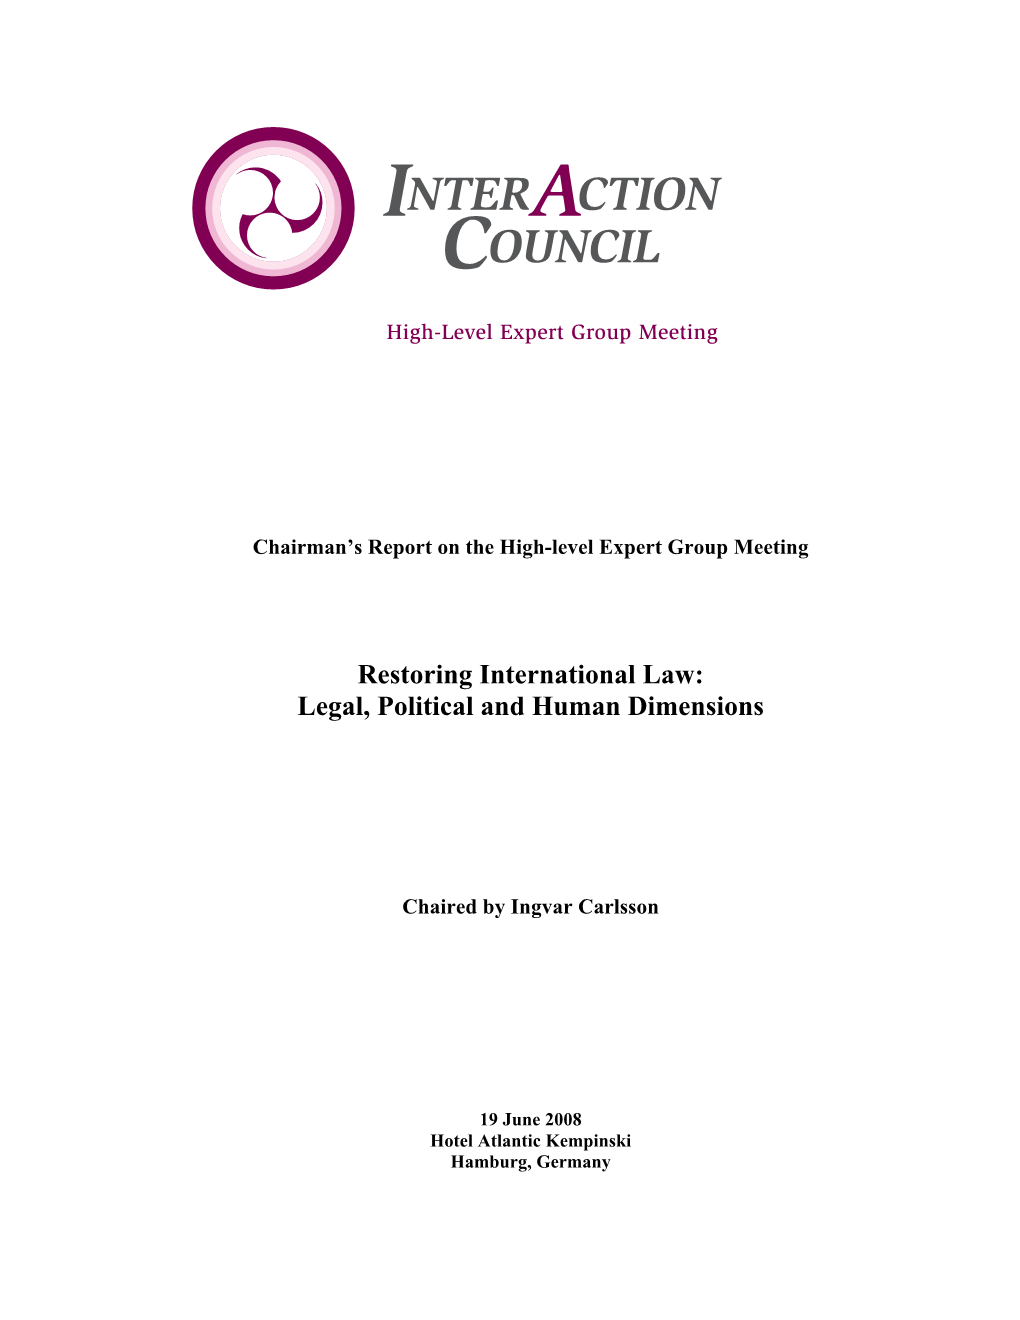 Restoring International Law: Legal, Political and Human Dimensions